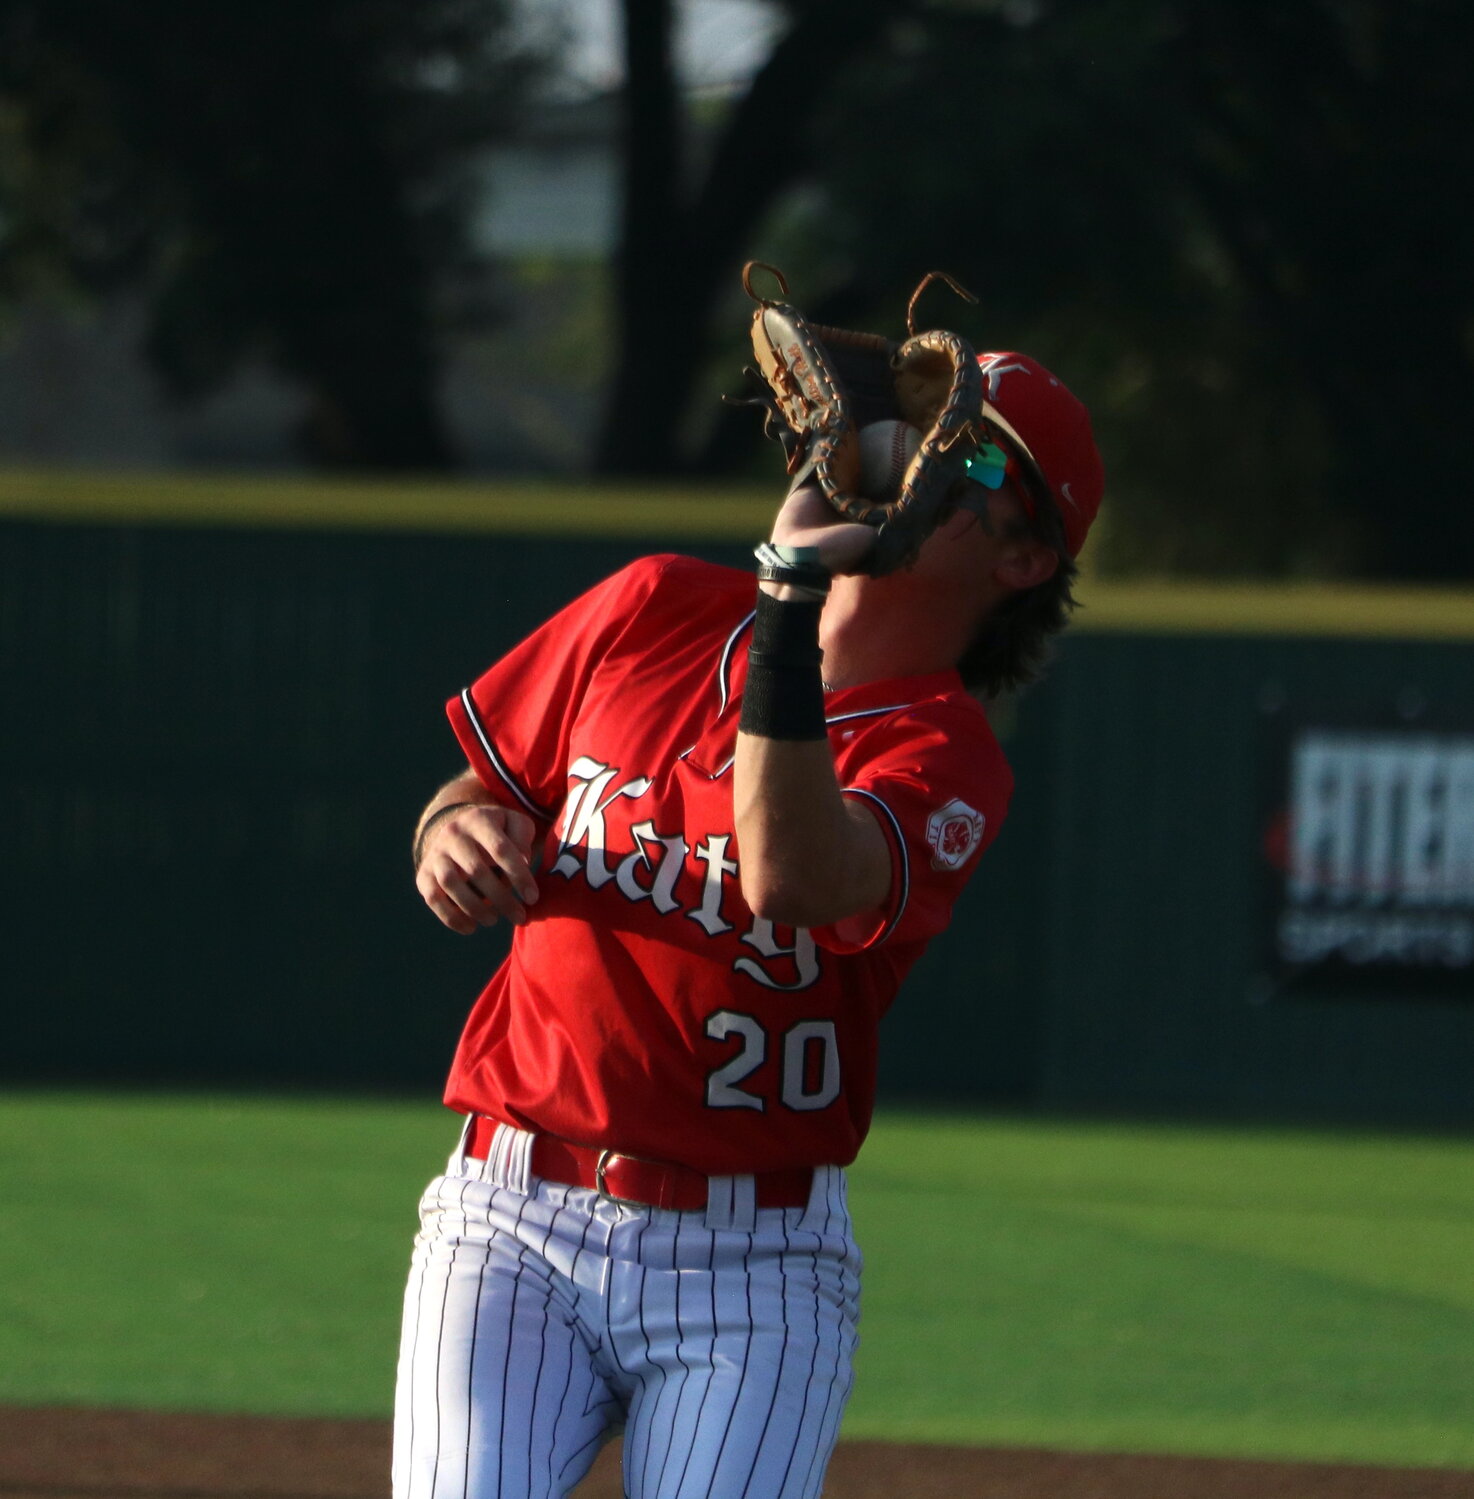 Sutton Hull makes a catch during Wednesday's Regional Semifinal between Katy and Clear Springs at Deer Park.